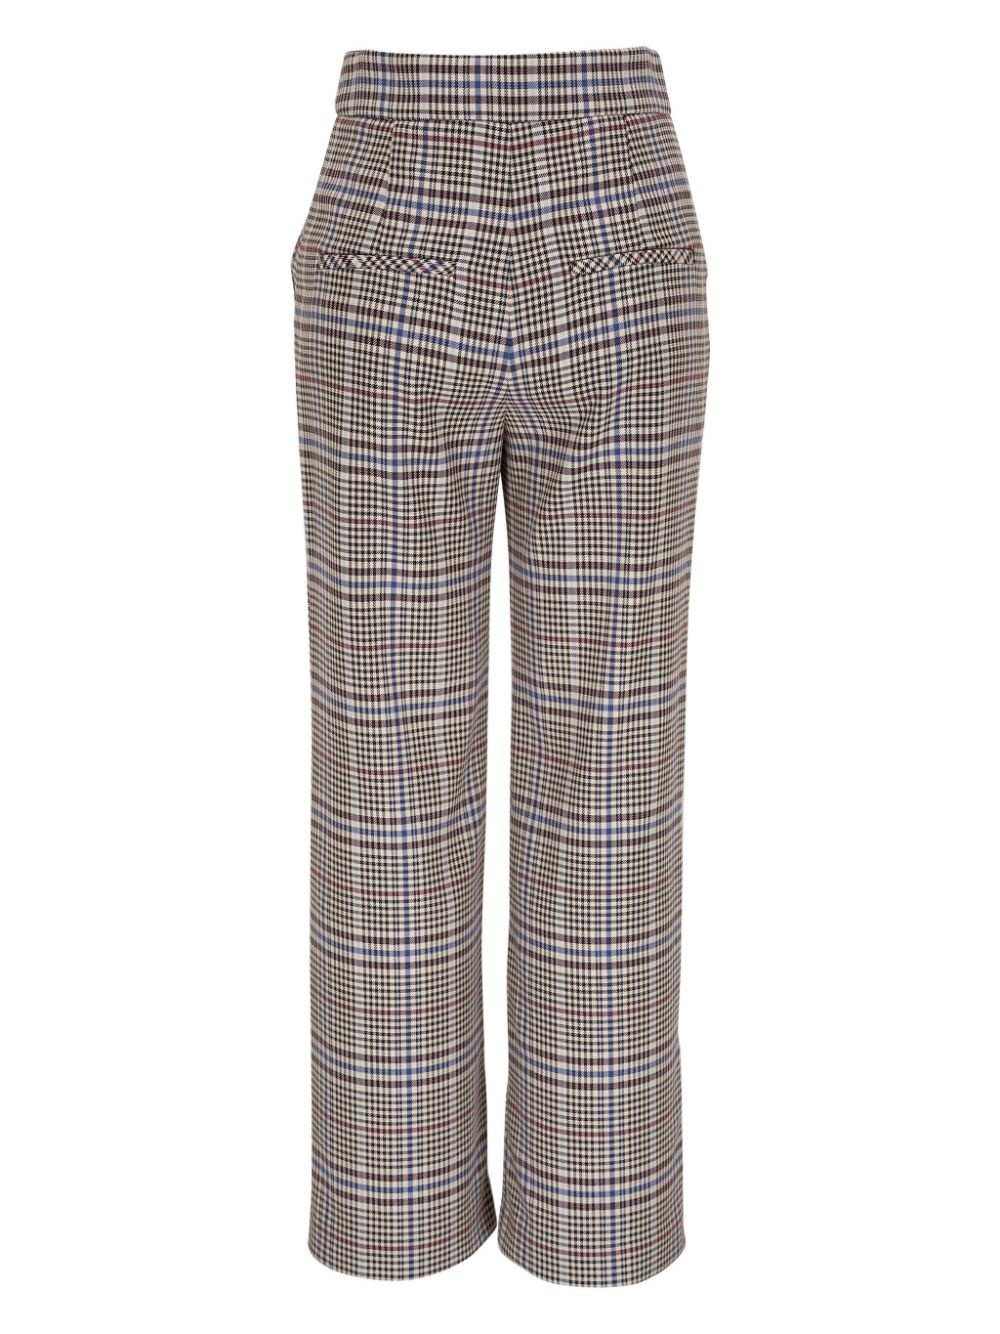 Brixton checked tailored trousers - 2